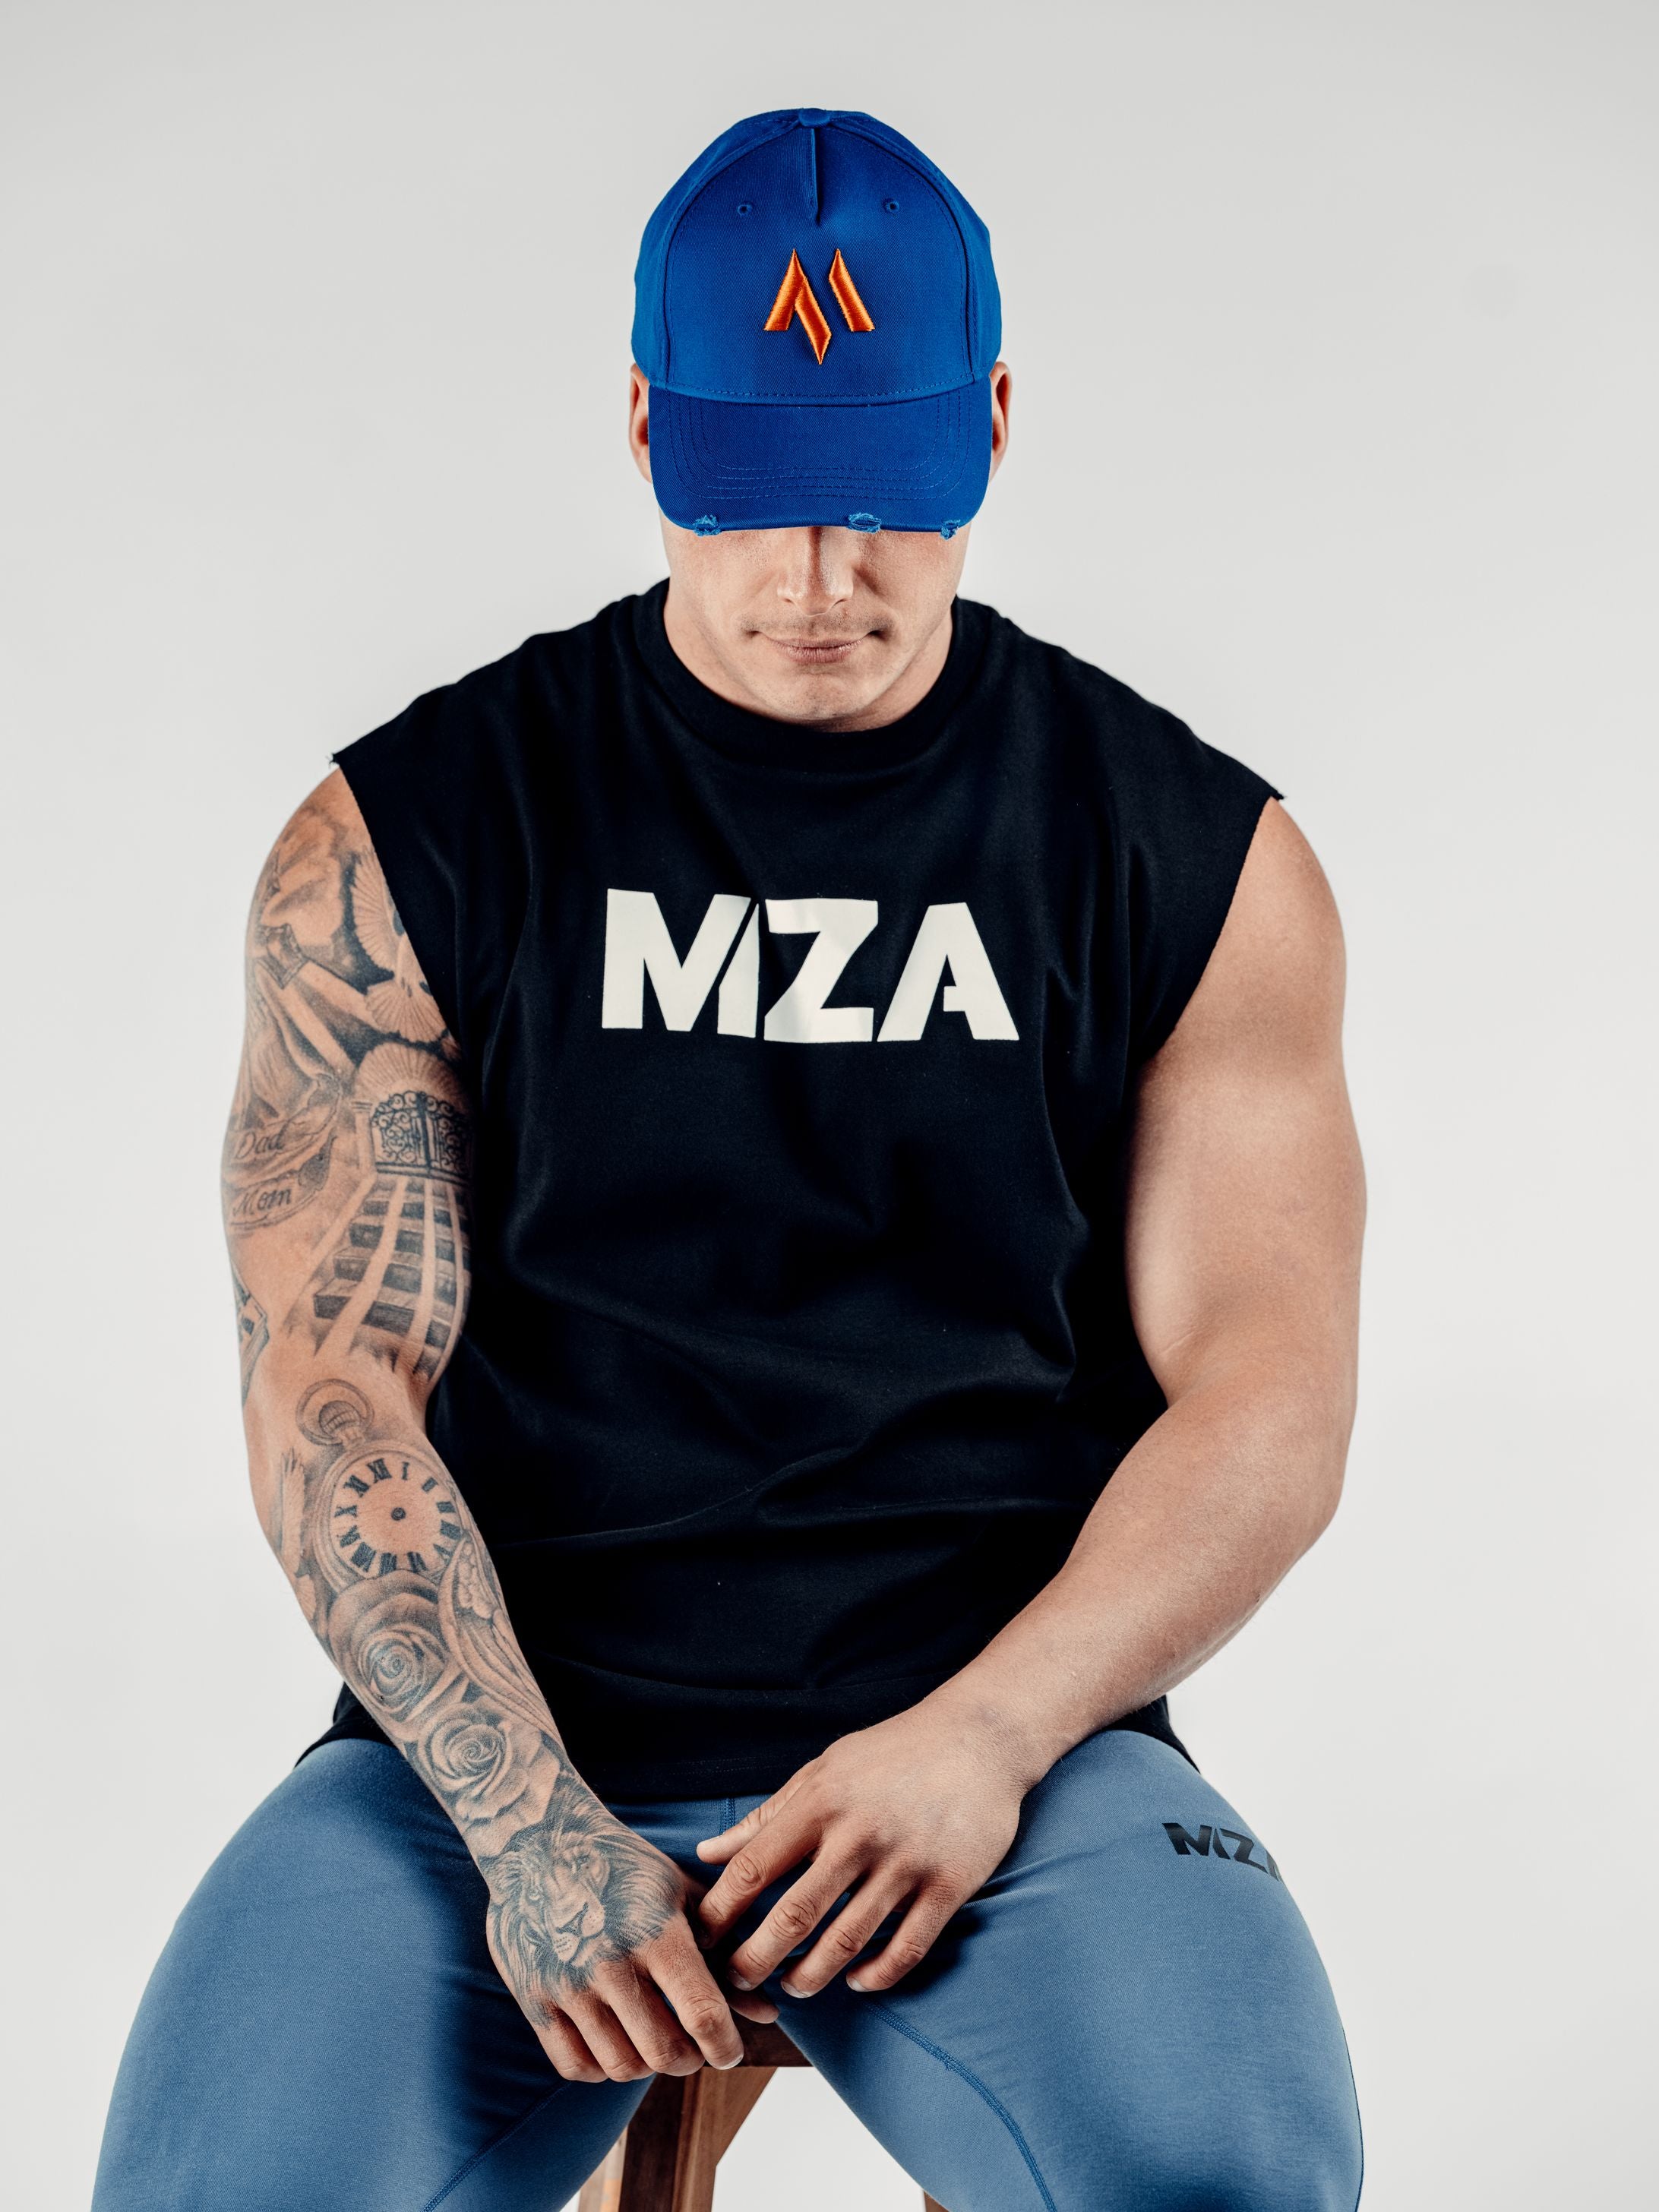 This is Lewis wearing the new standard 3d distressed 5 panel in electric blue.  It features the M emblem in orange.  Lewis is looking down with the peak covering his eyes and is also wearing the new standard vest in black and new standard joggers in blue